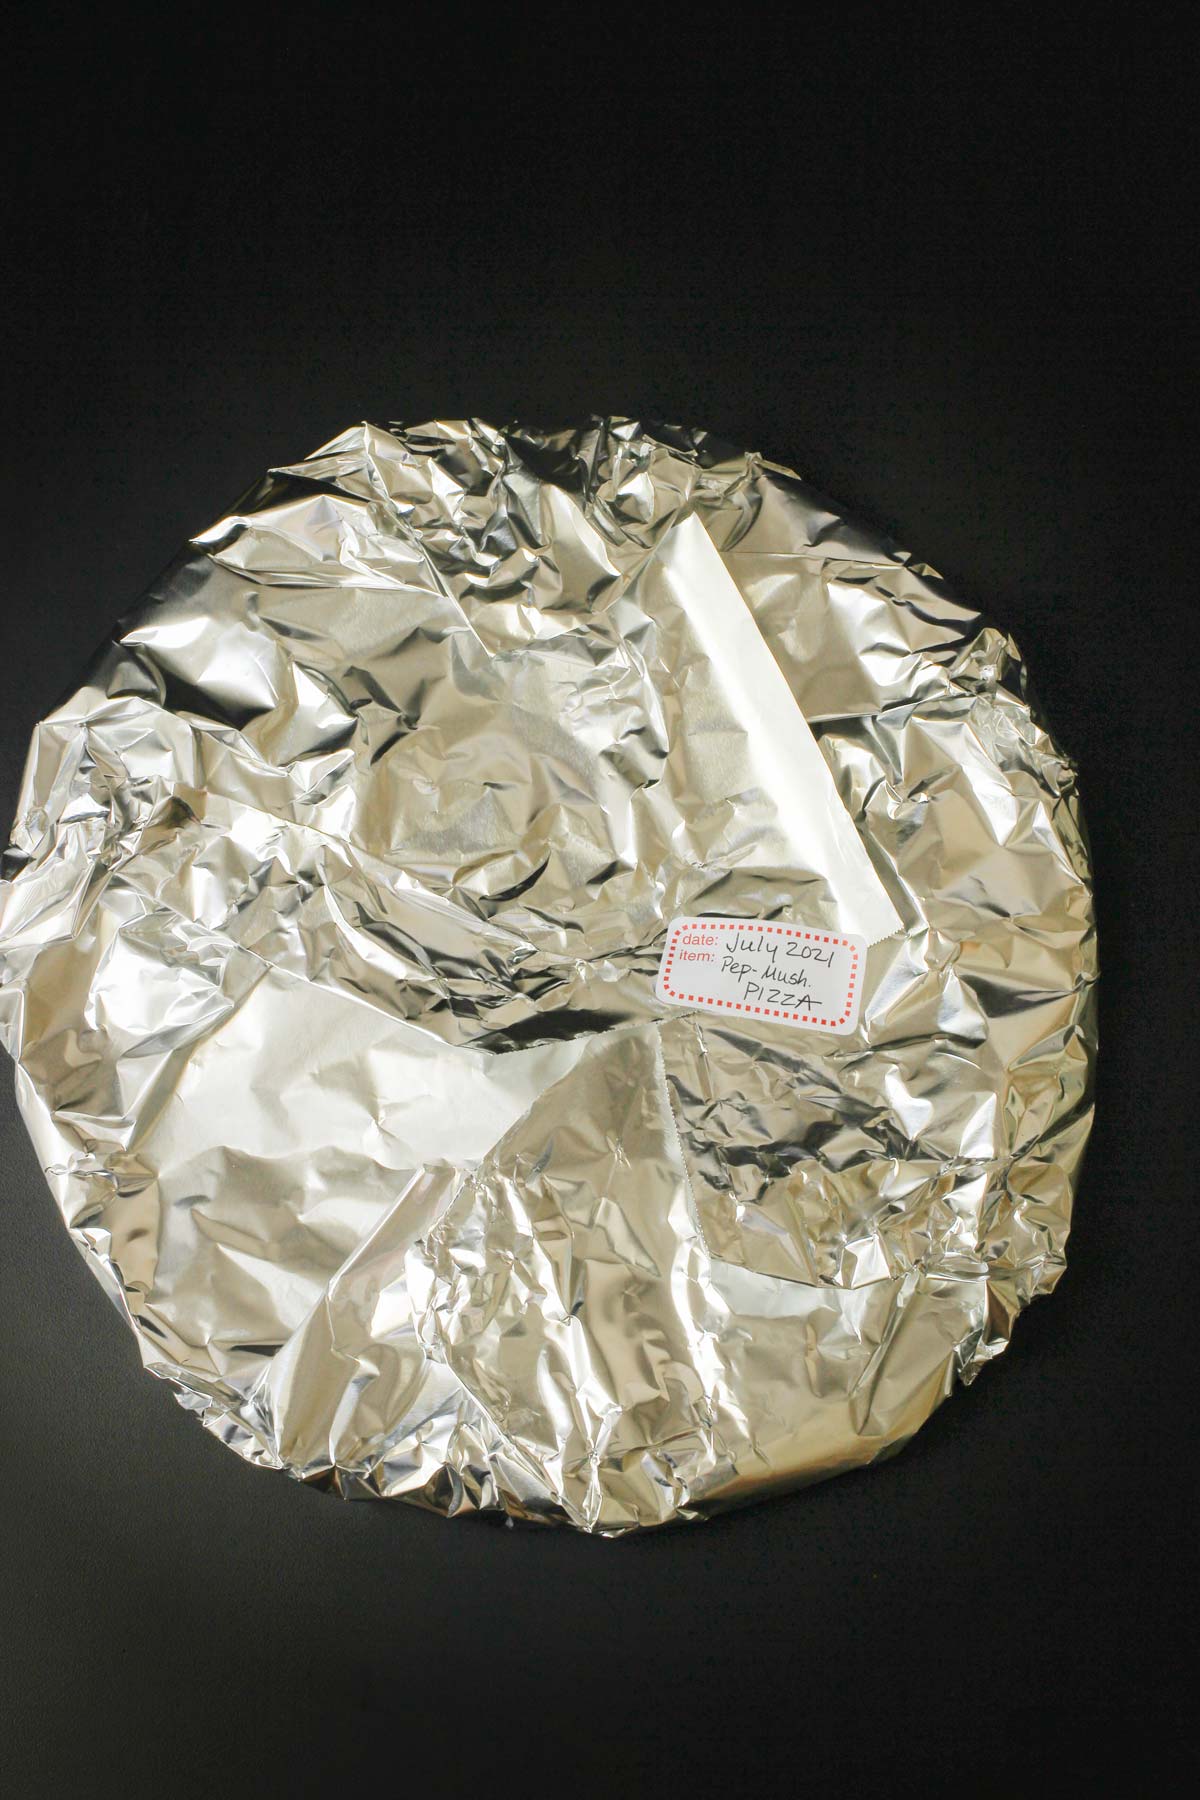 a whole pizza wrapped in foil.